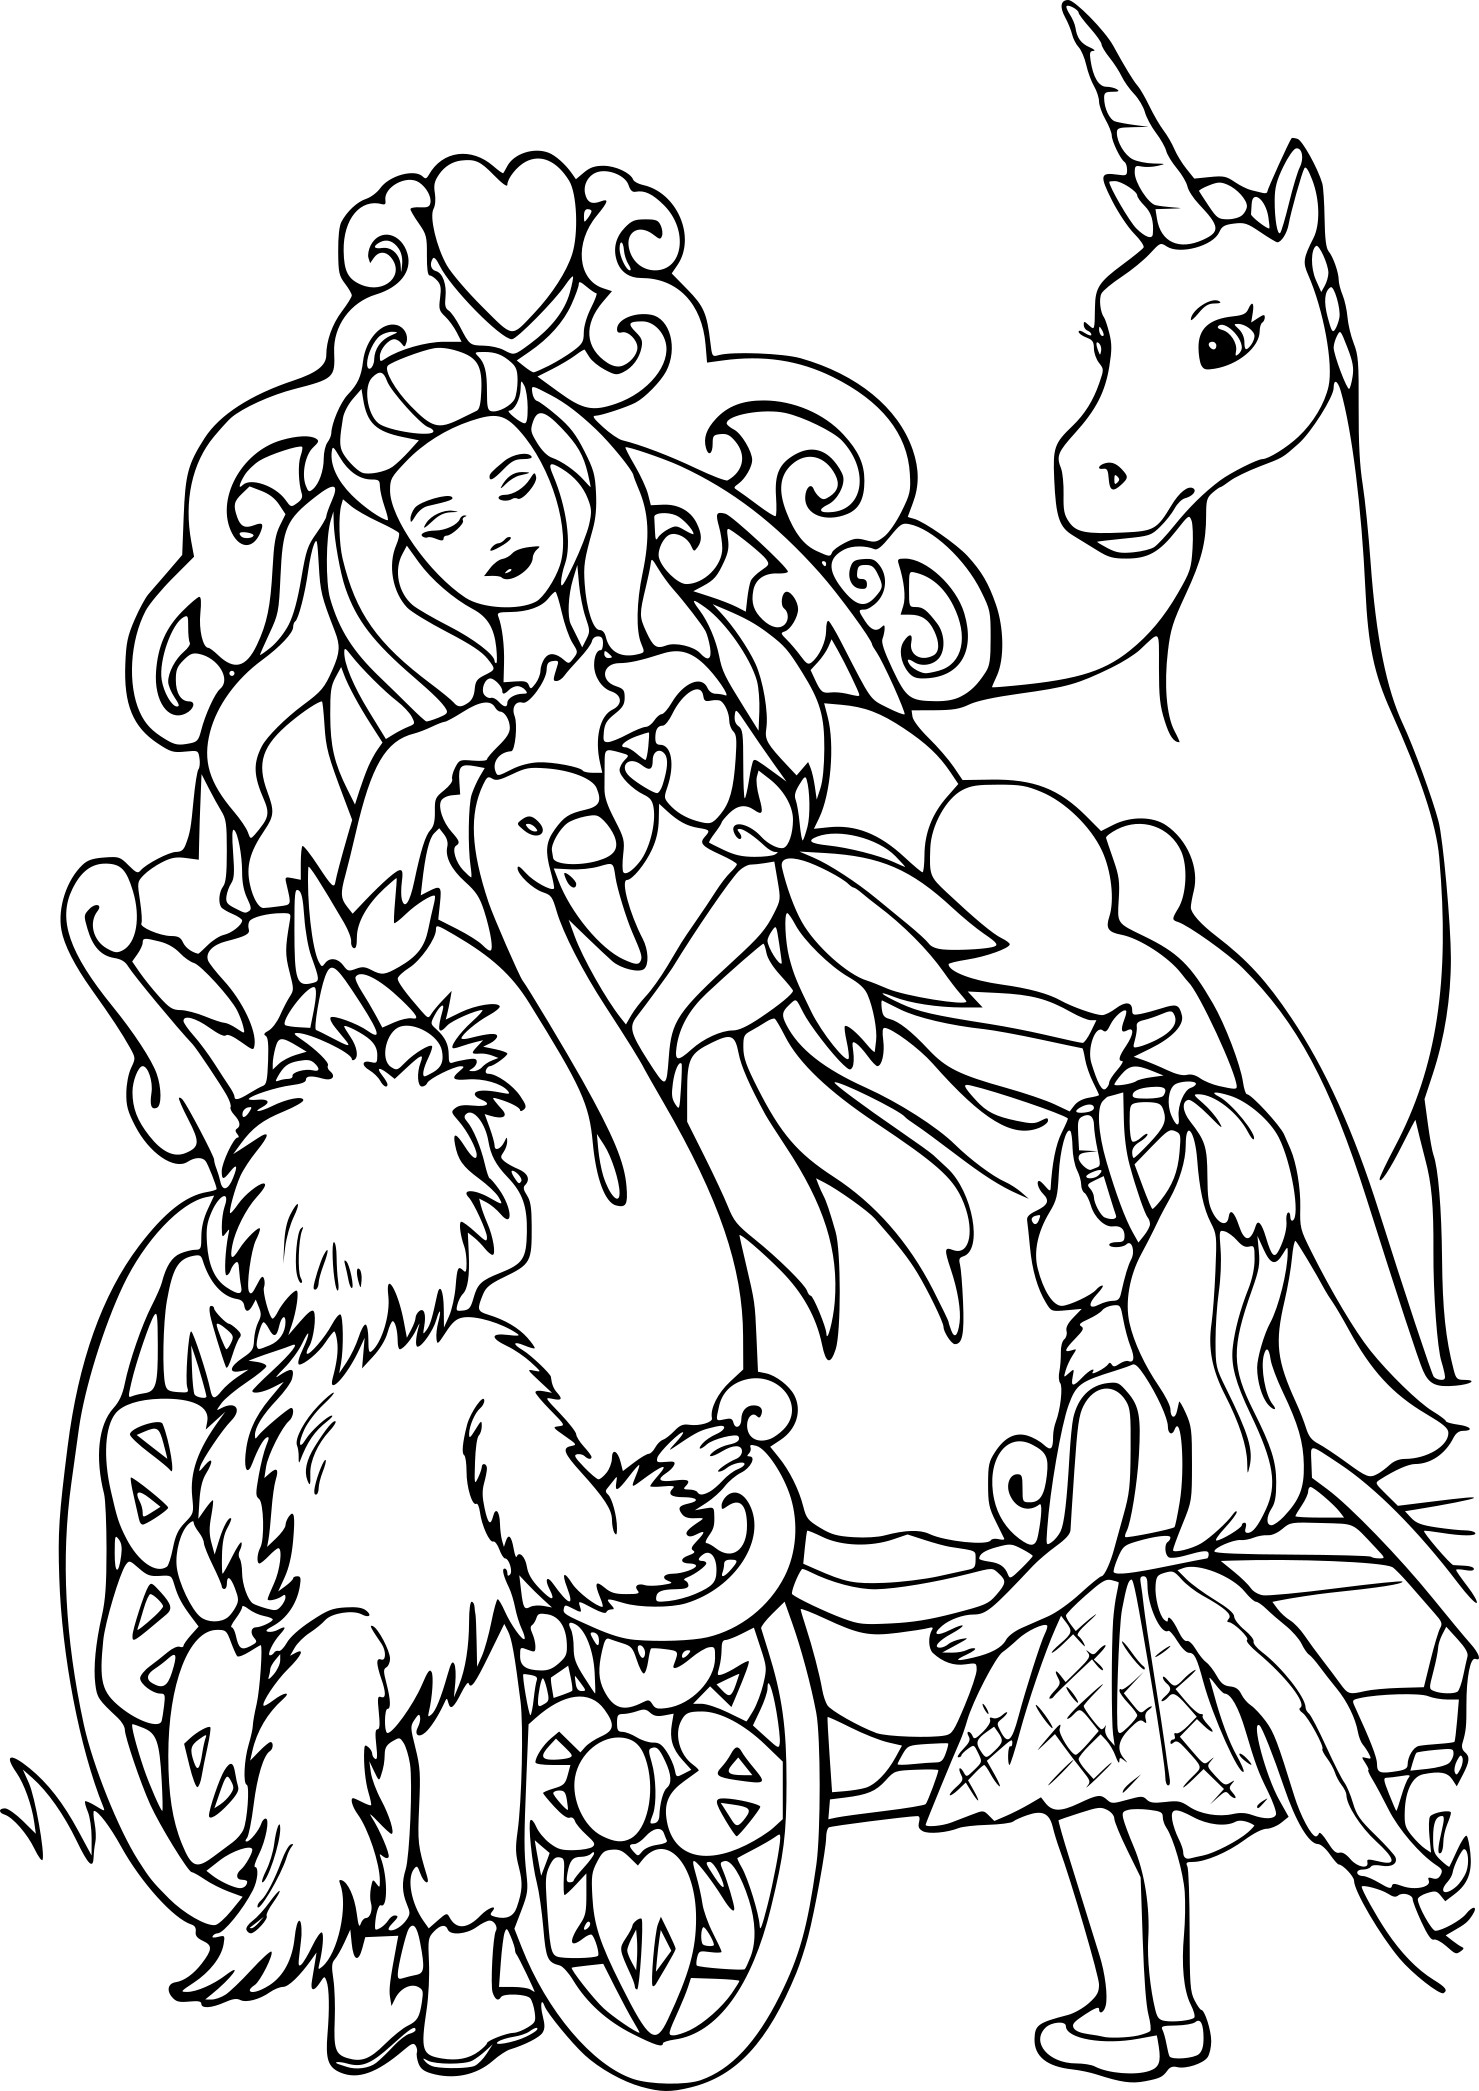 Barbie unicorn with princess Coloring Pages - Barbie Horse Coloring Pages - Coloring  Pages For Kids And Adults